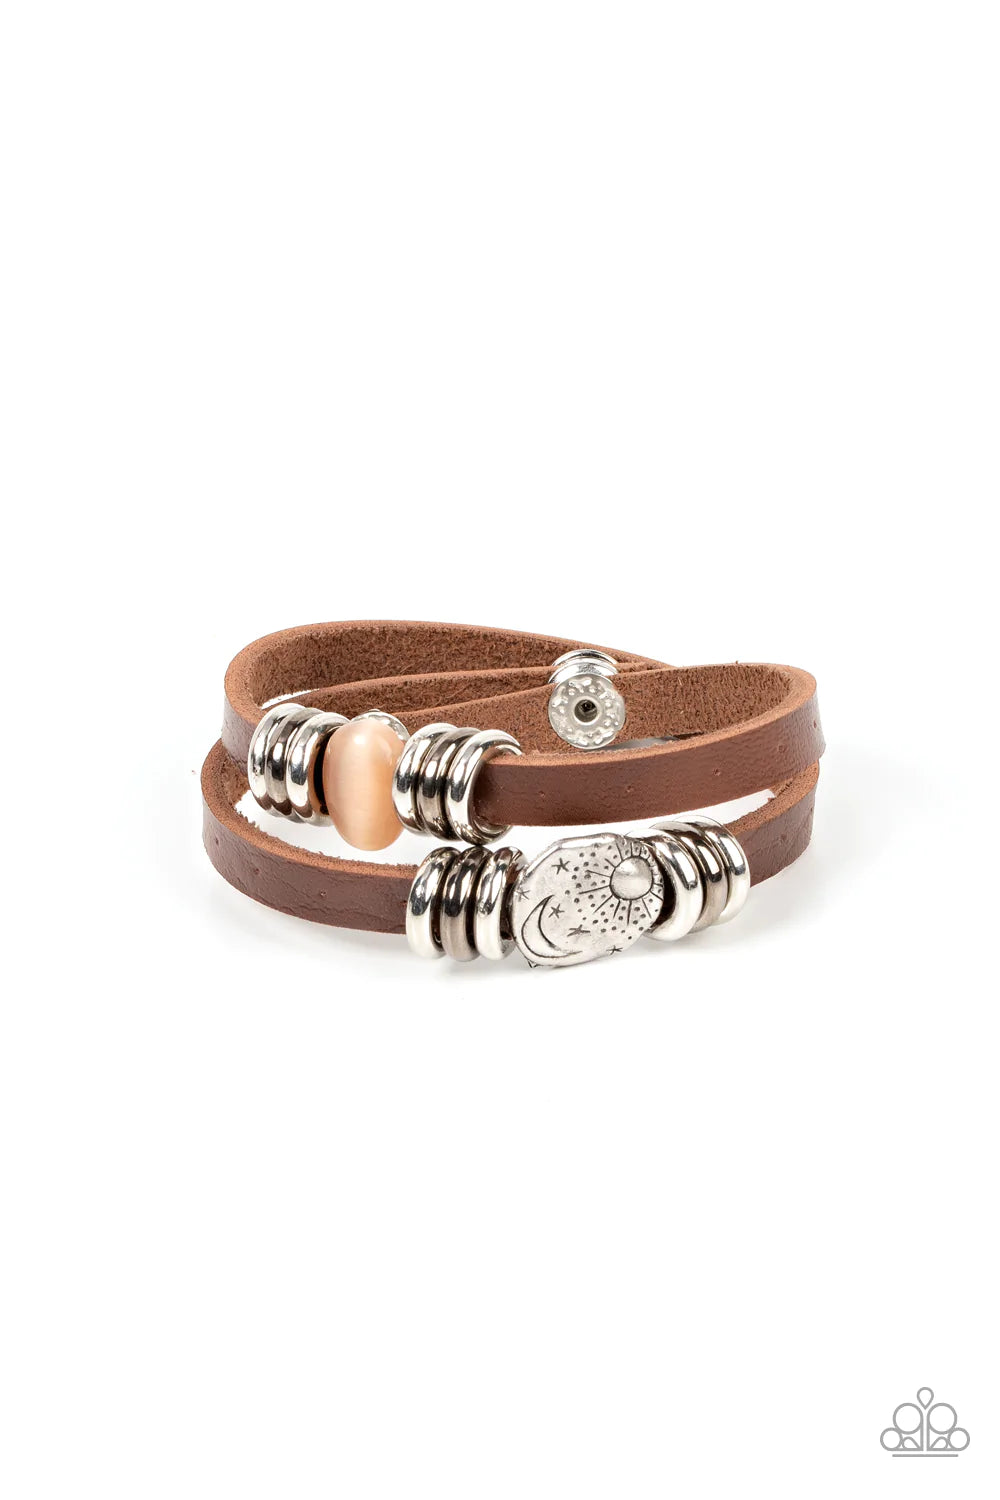 Paparazzi Accessories All Willy-Nilly - Orange Infused with trios of silver and gunmetal rings, a glassy orange cat's eye stone and hammered silver disc stamped in a starry sun and moon pattern adorns layered brown leather bands around the wrist for a sea